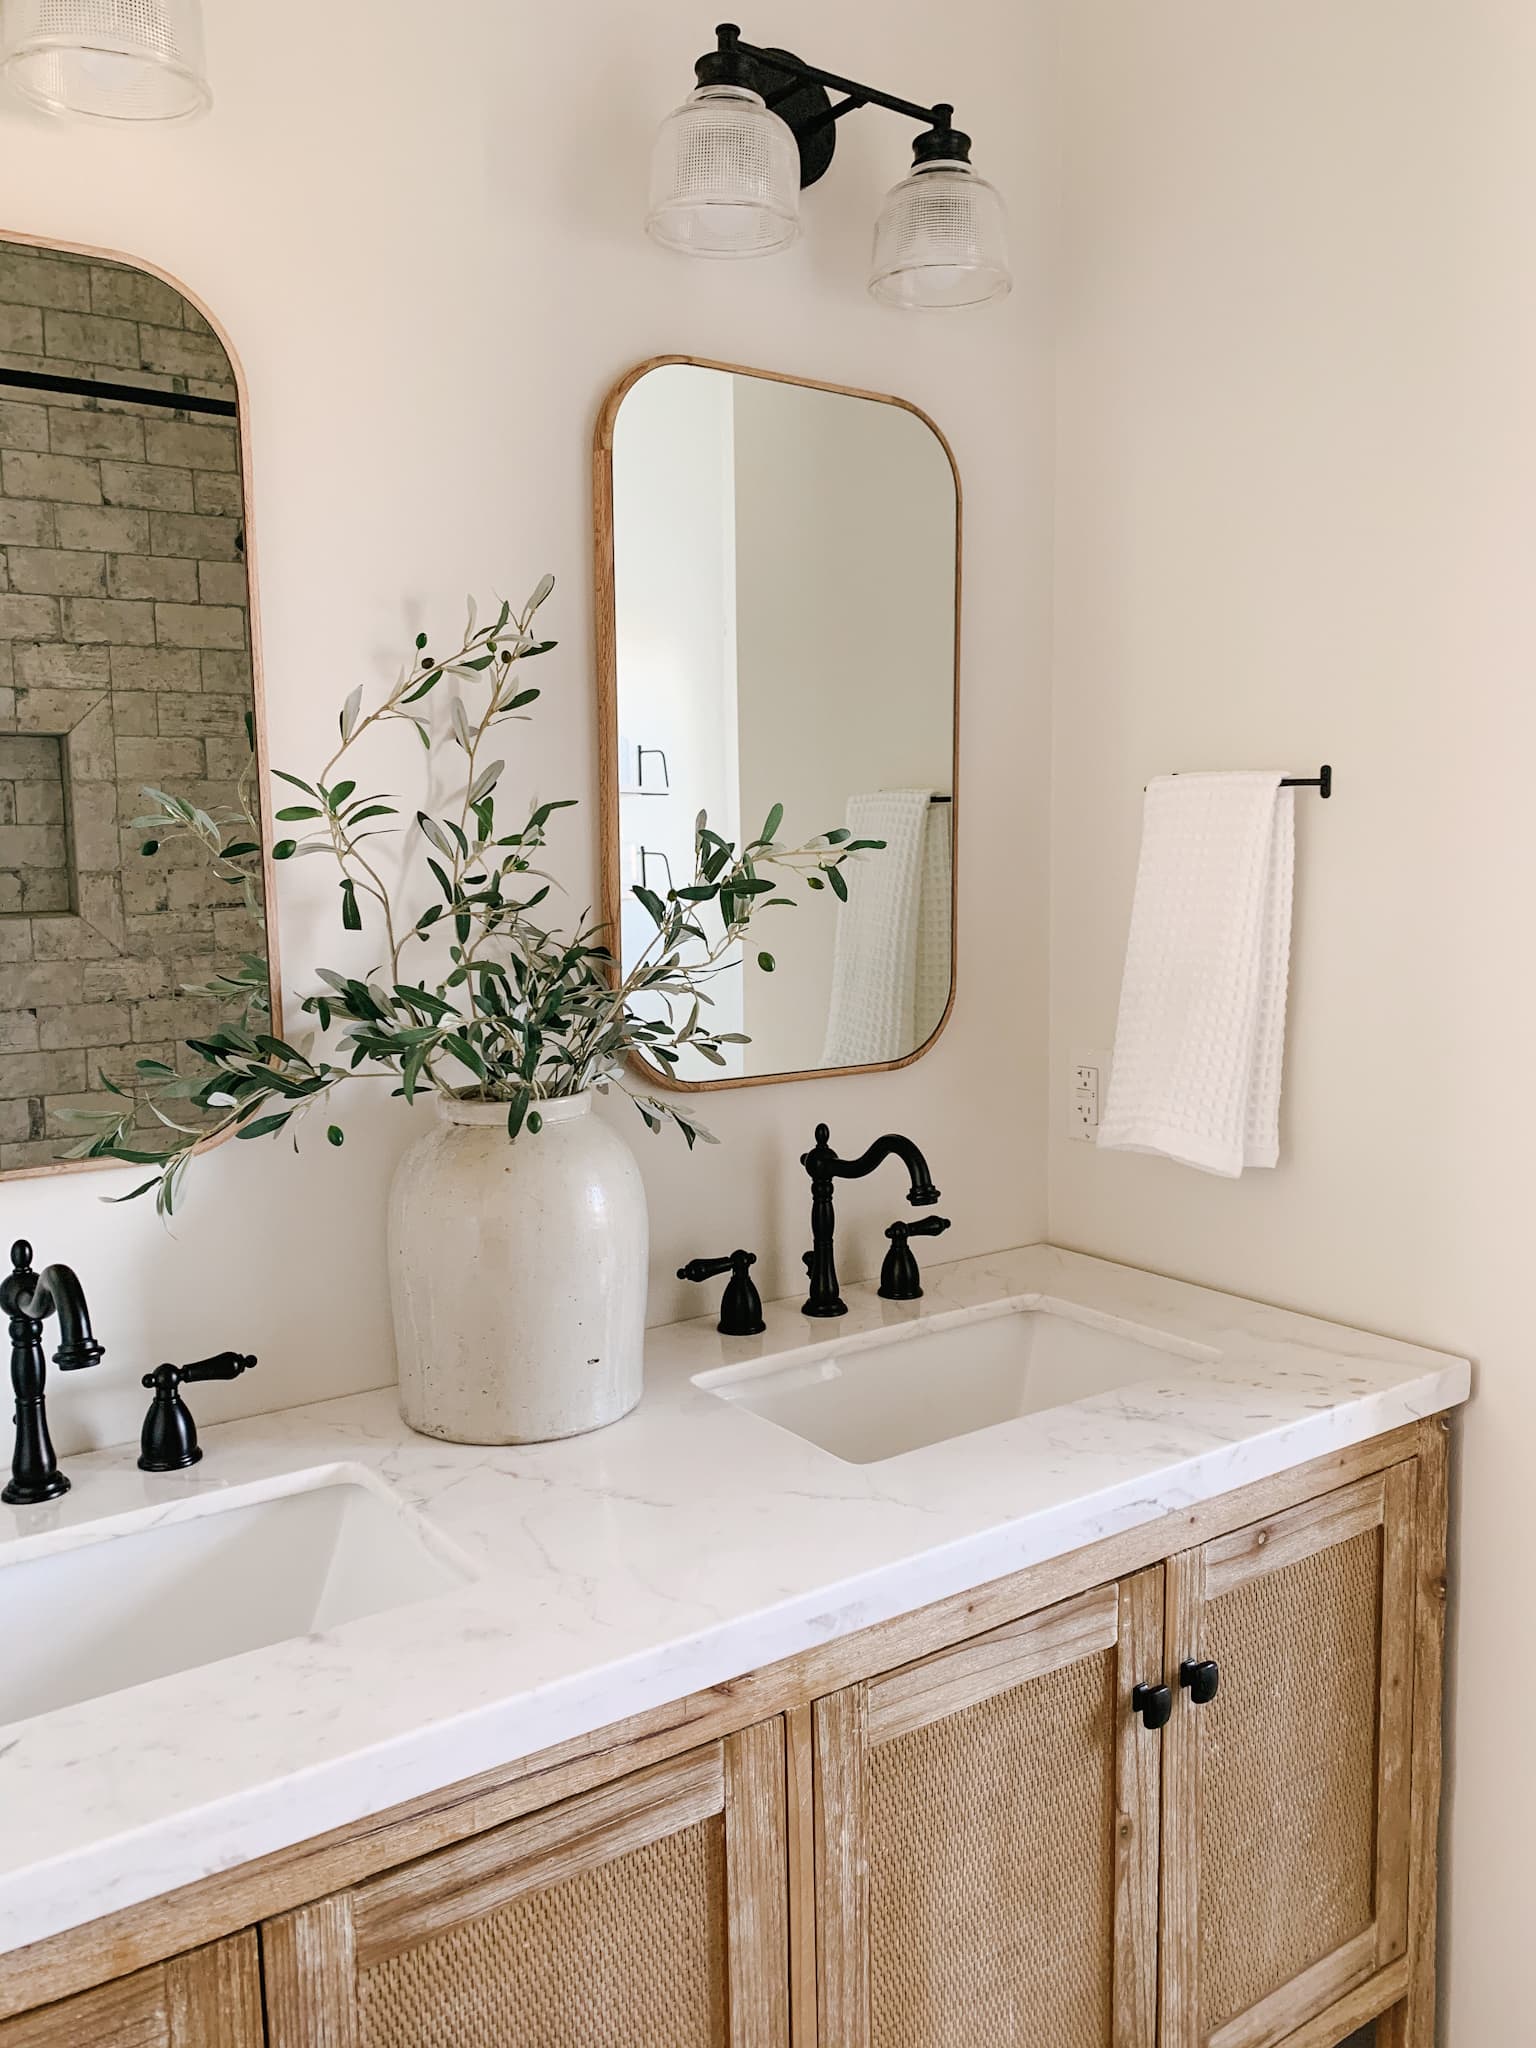 Changes to Make in Your Bathroom That Have a Big Impact